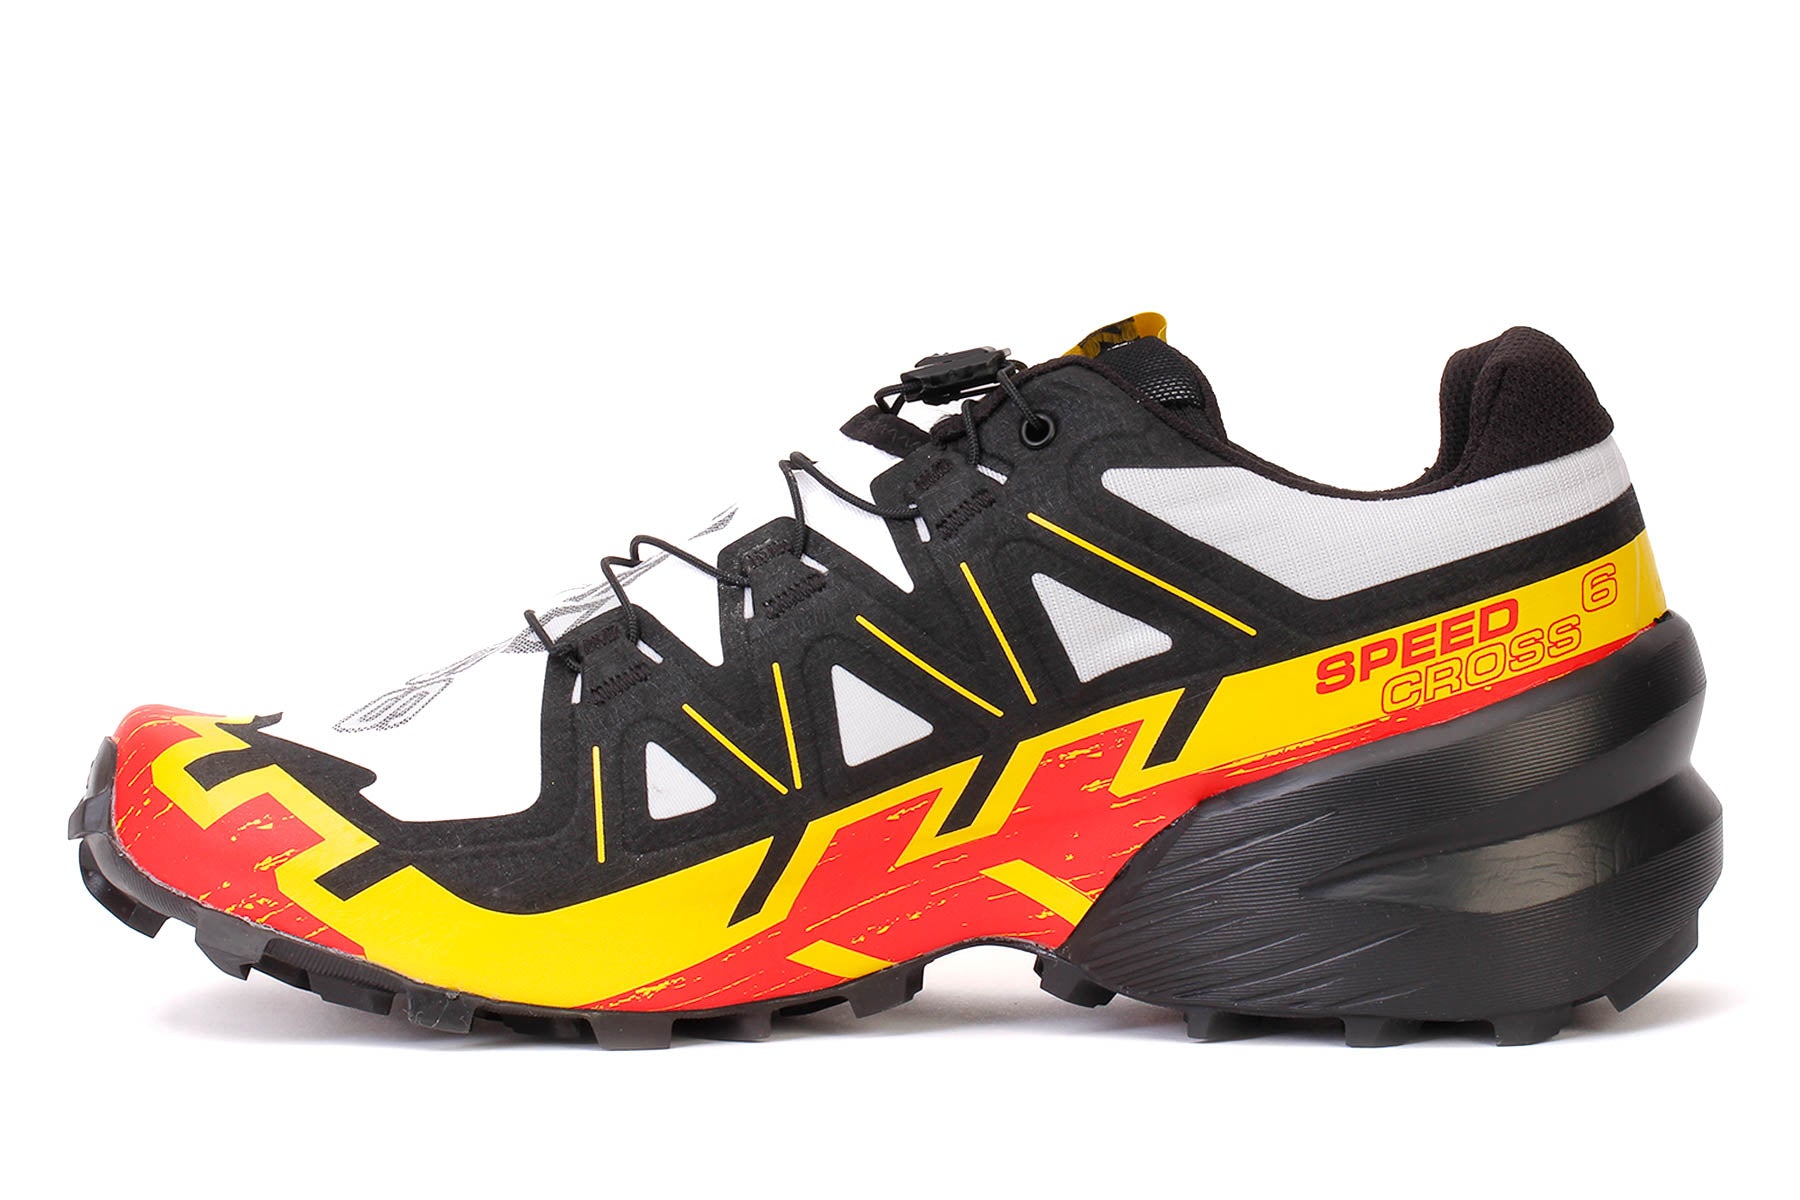 Speedcross 6 Forces - Unisex Trail Running Shoes